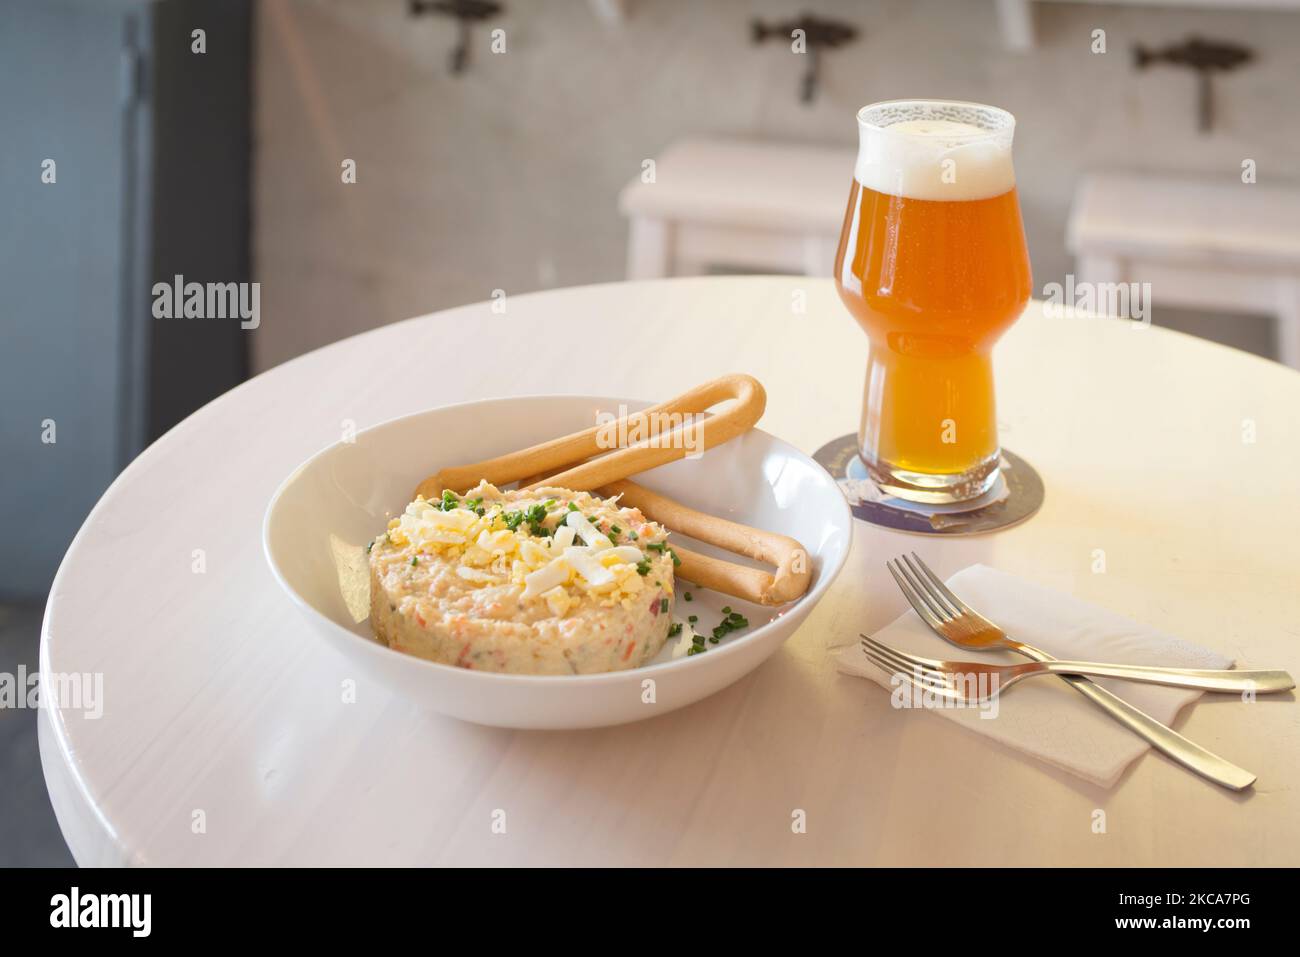 Typical Spanish tapa of Russian salad with boiled egg, dry bread sticks and a glass of beer Stock Photo